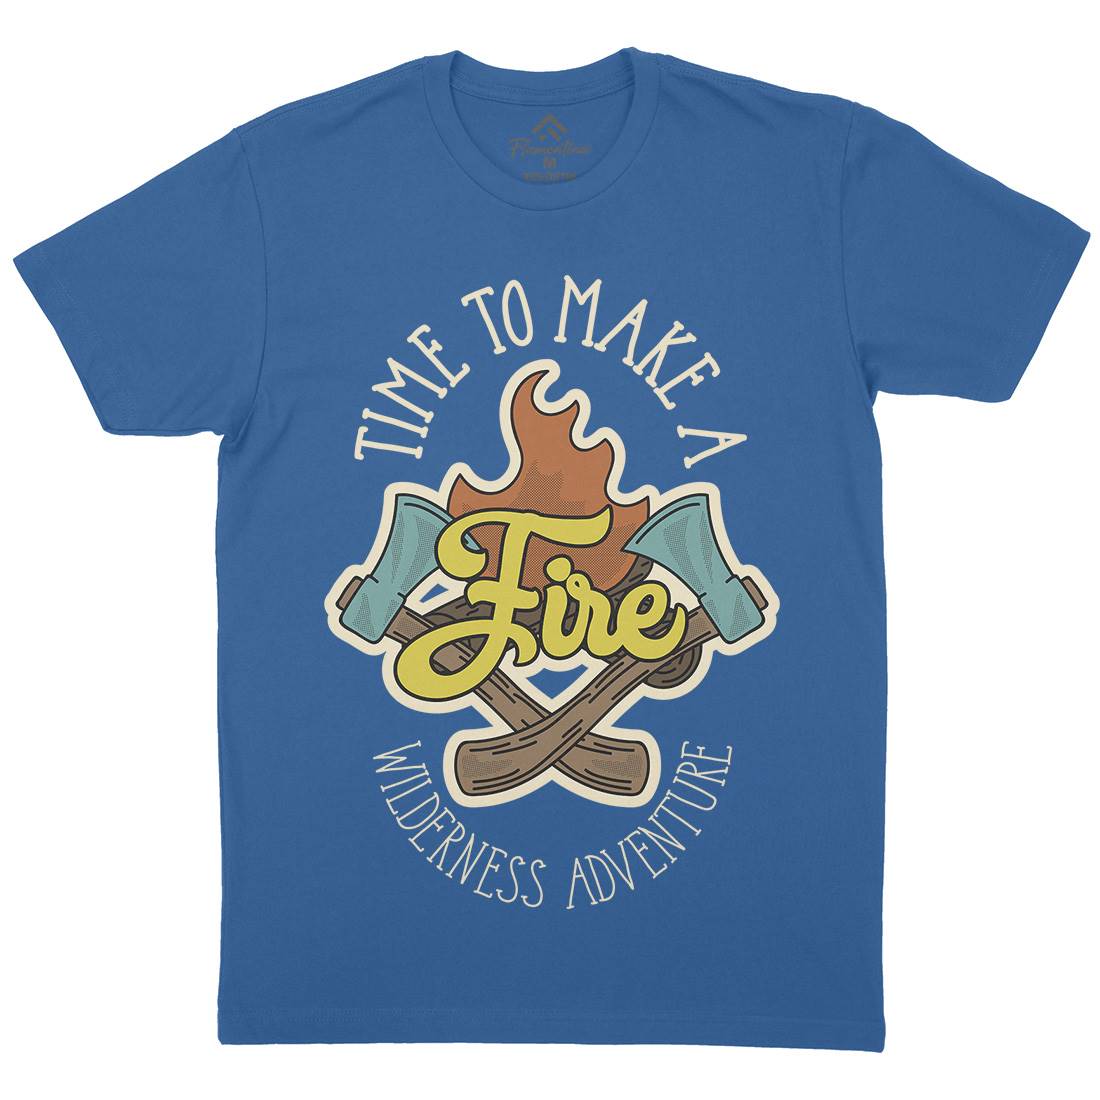 Time To Make Fire Mens Organic Crew Neck T-Shirt Nature D992